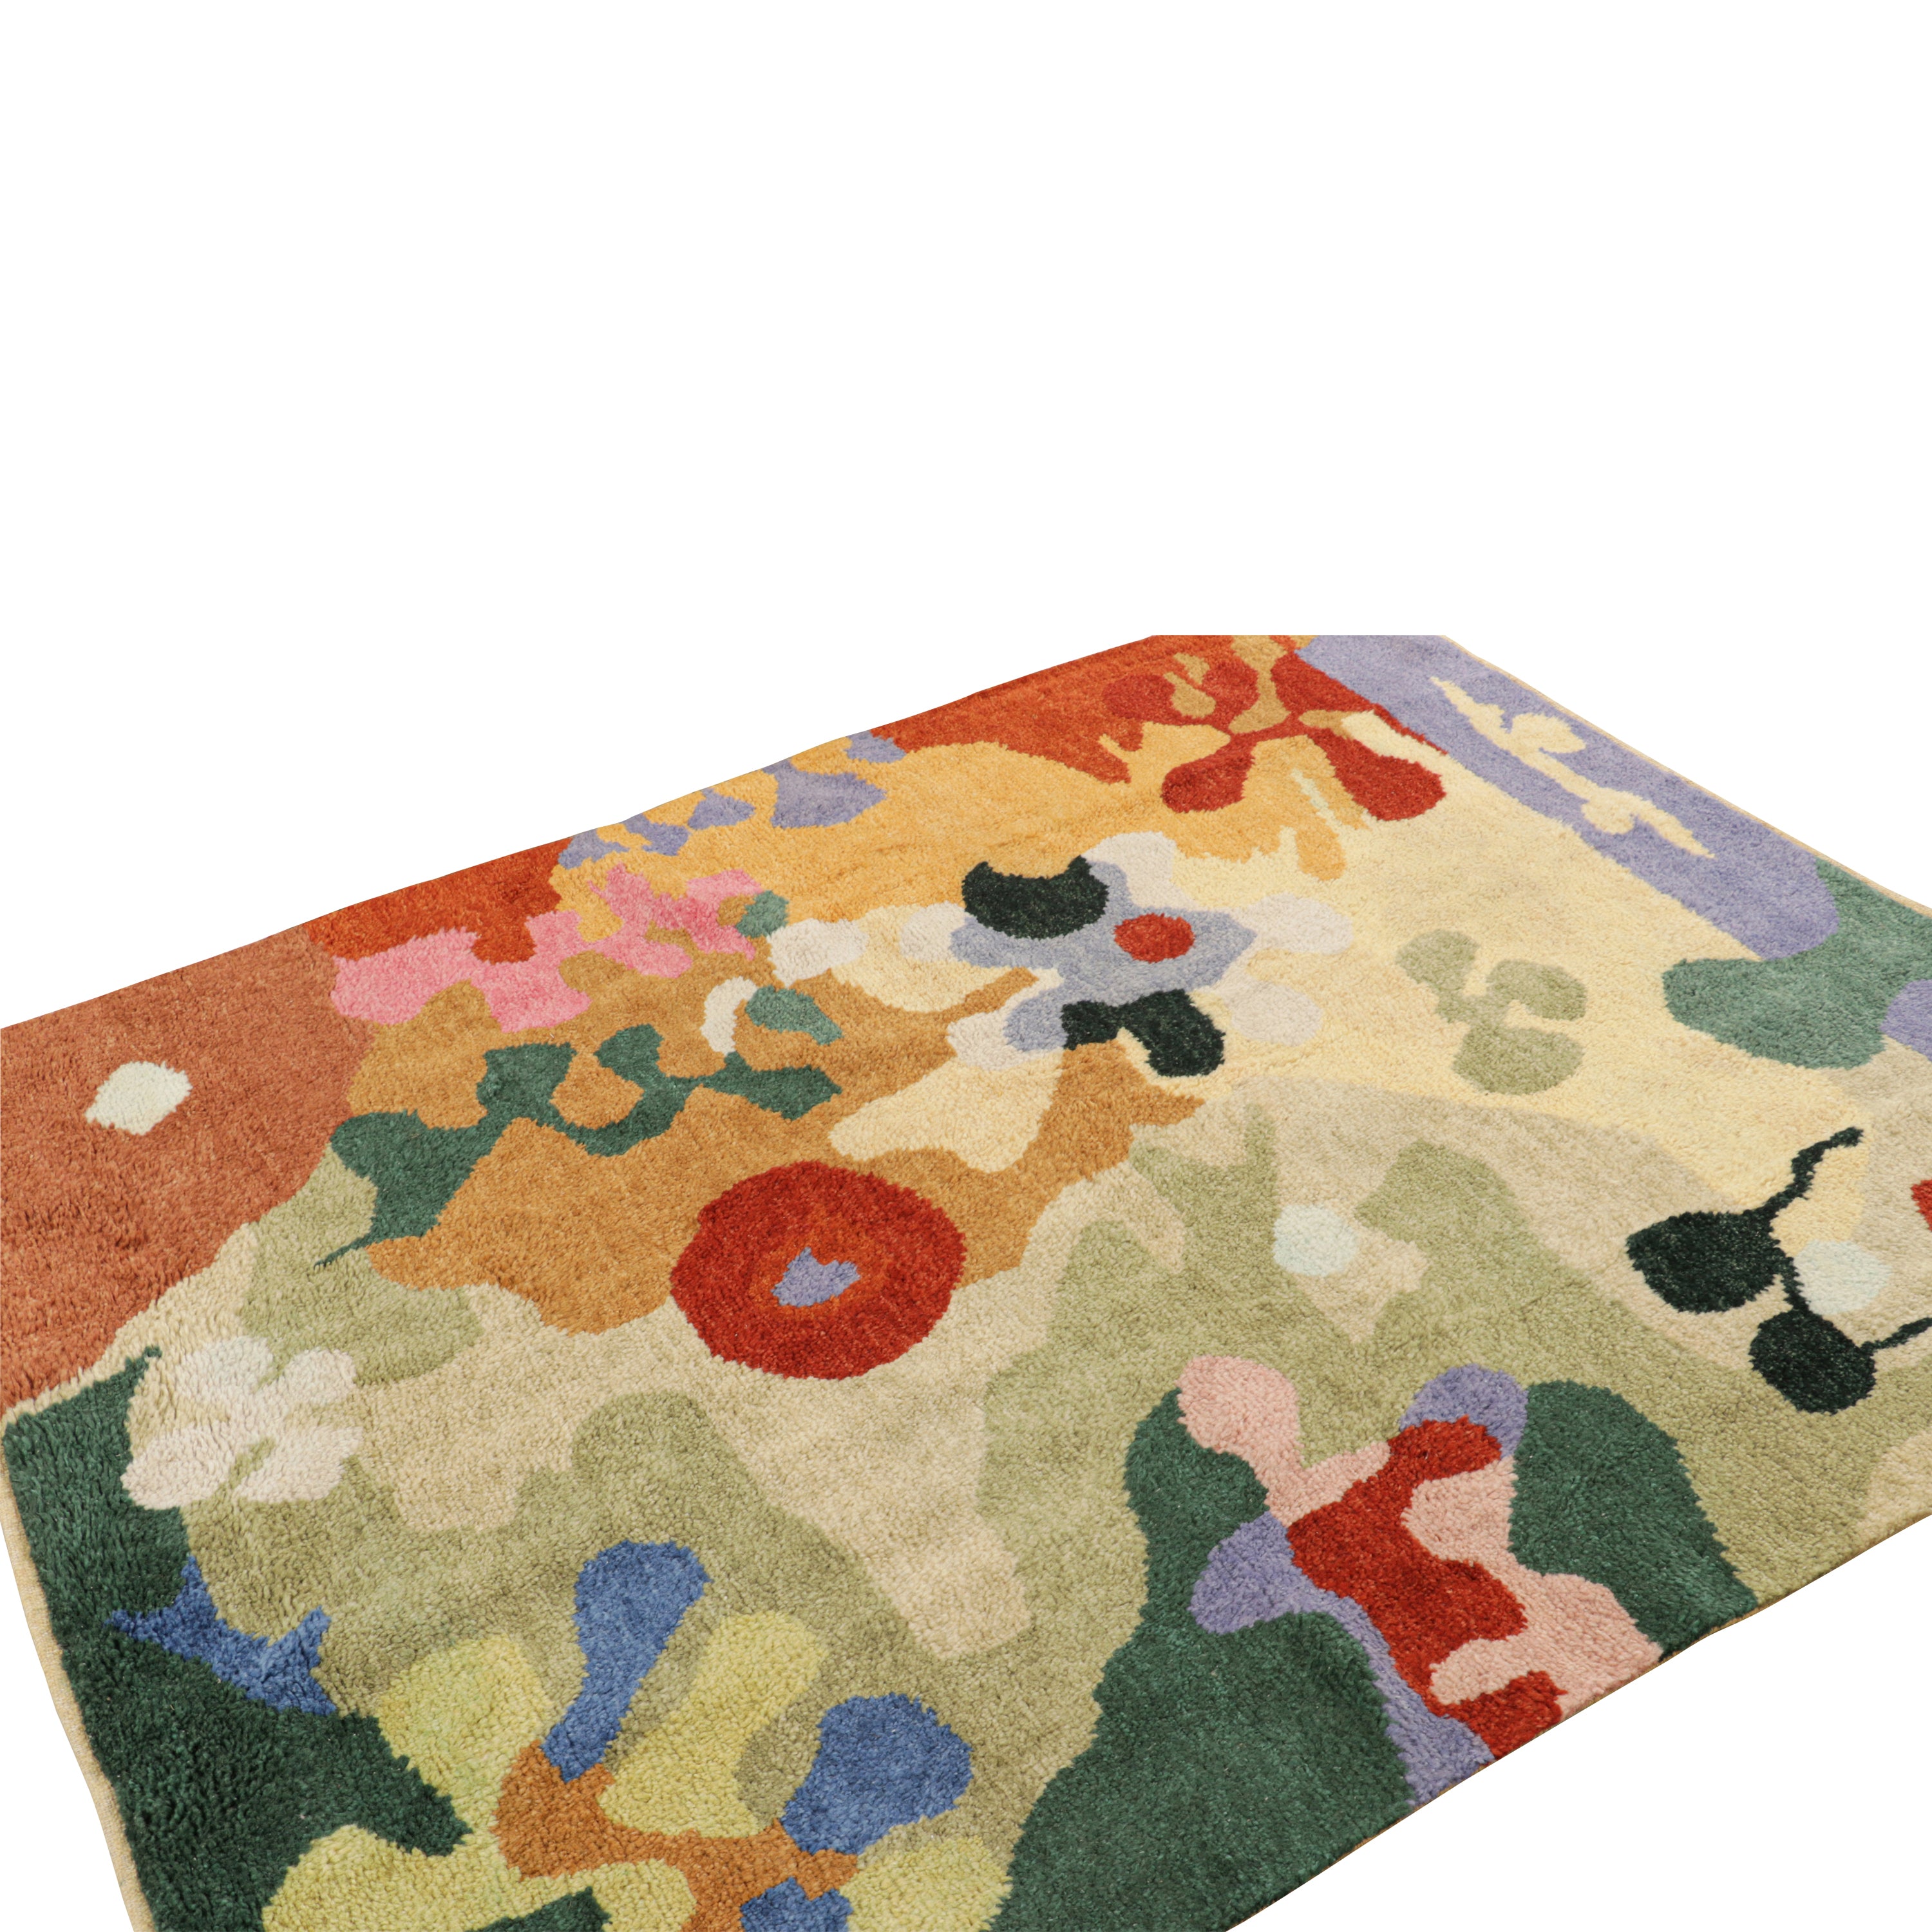 Multicolored Contemporary Art Deco Wool Cotton Blend Rug - 5'5" x 6'7"